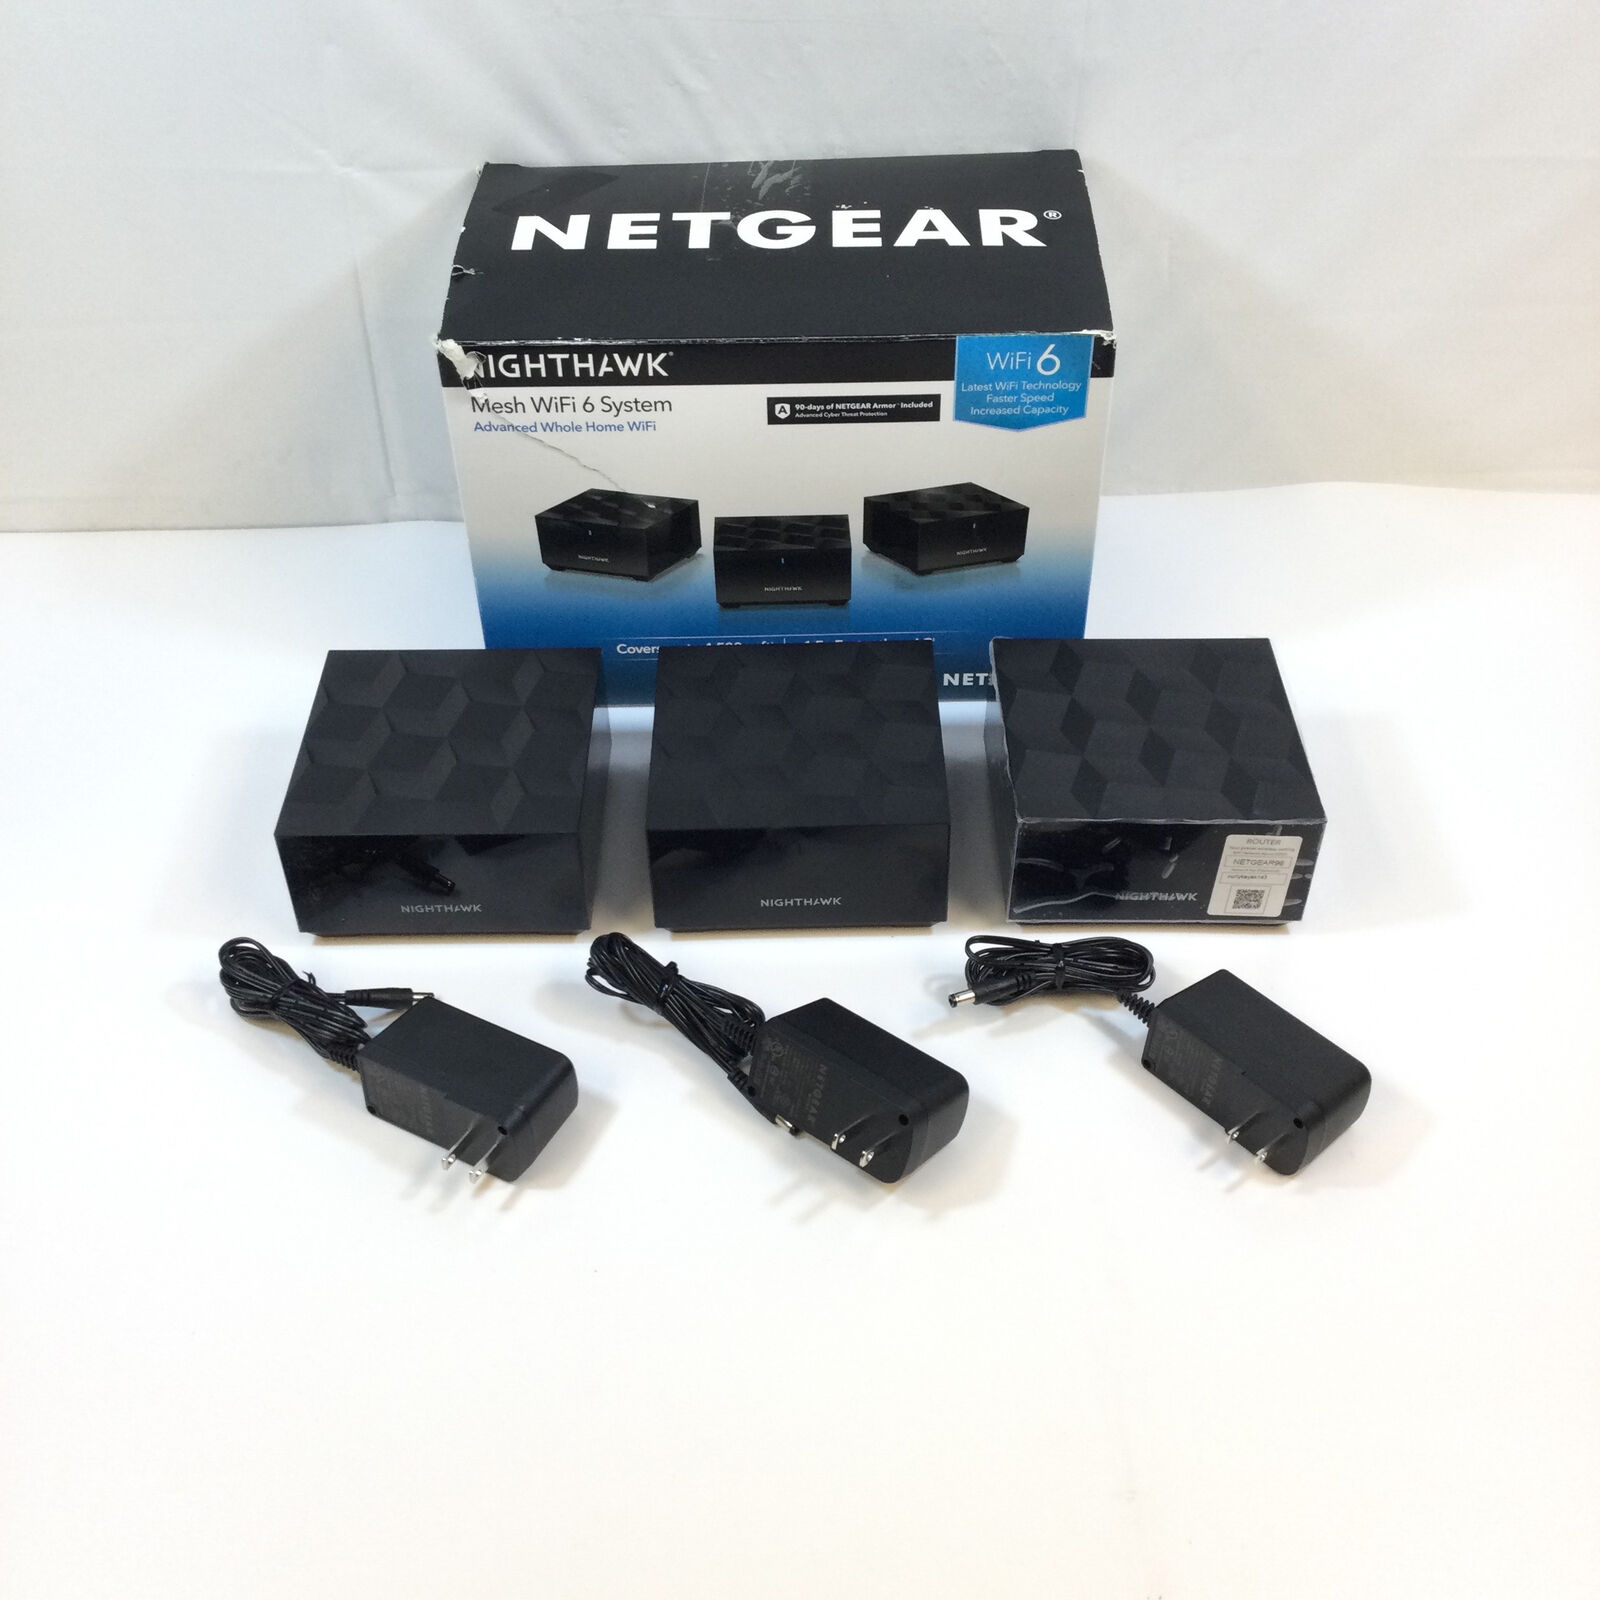 Netgear MK63S-100NAS Black Whole Home Nighthawk Mesh WiFi 6 Router System Used